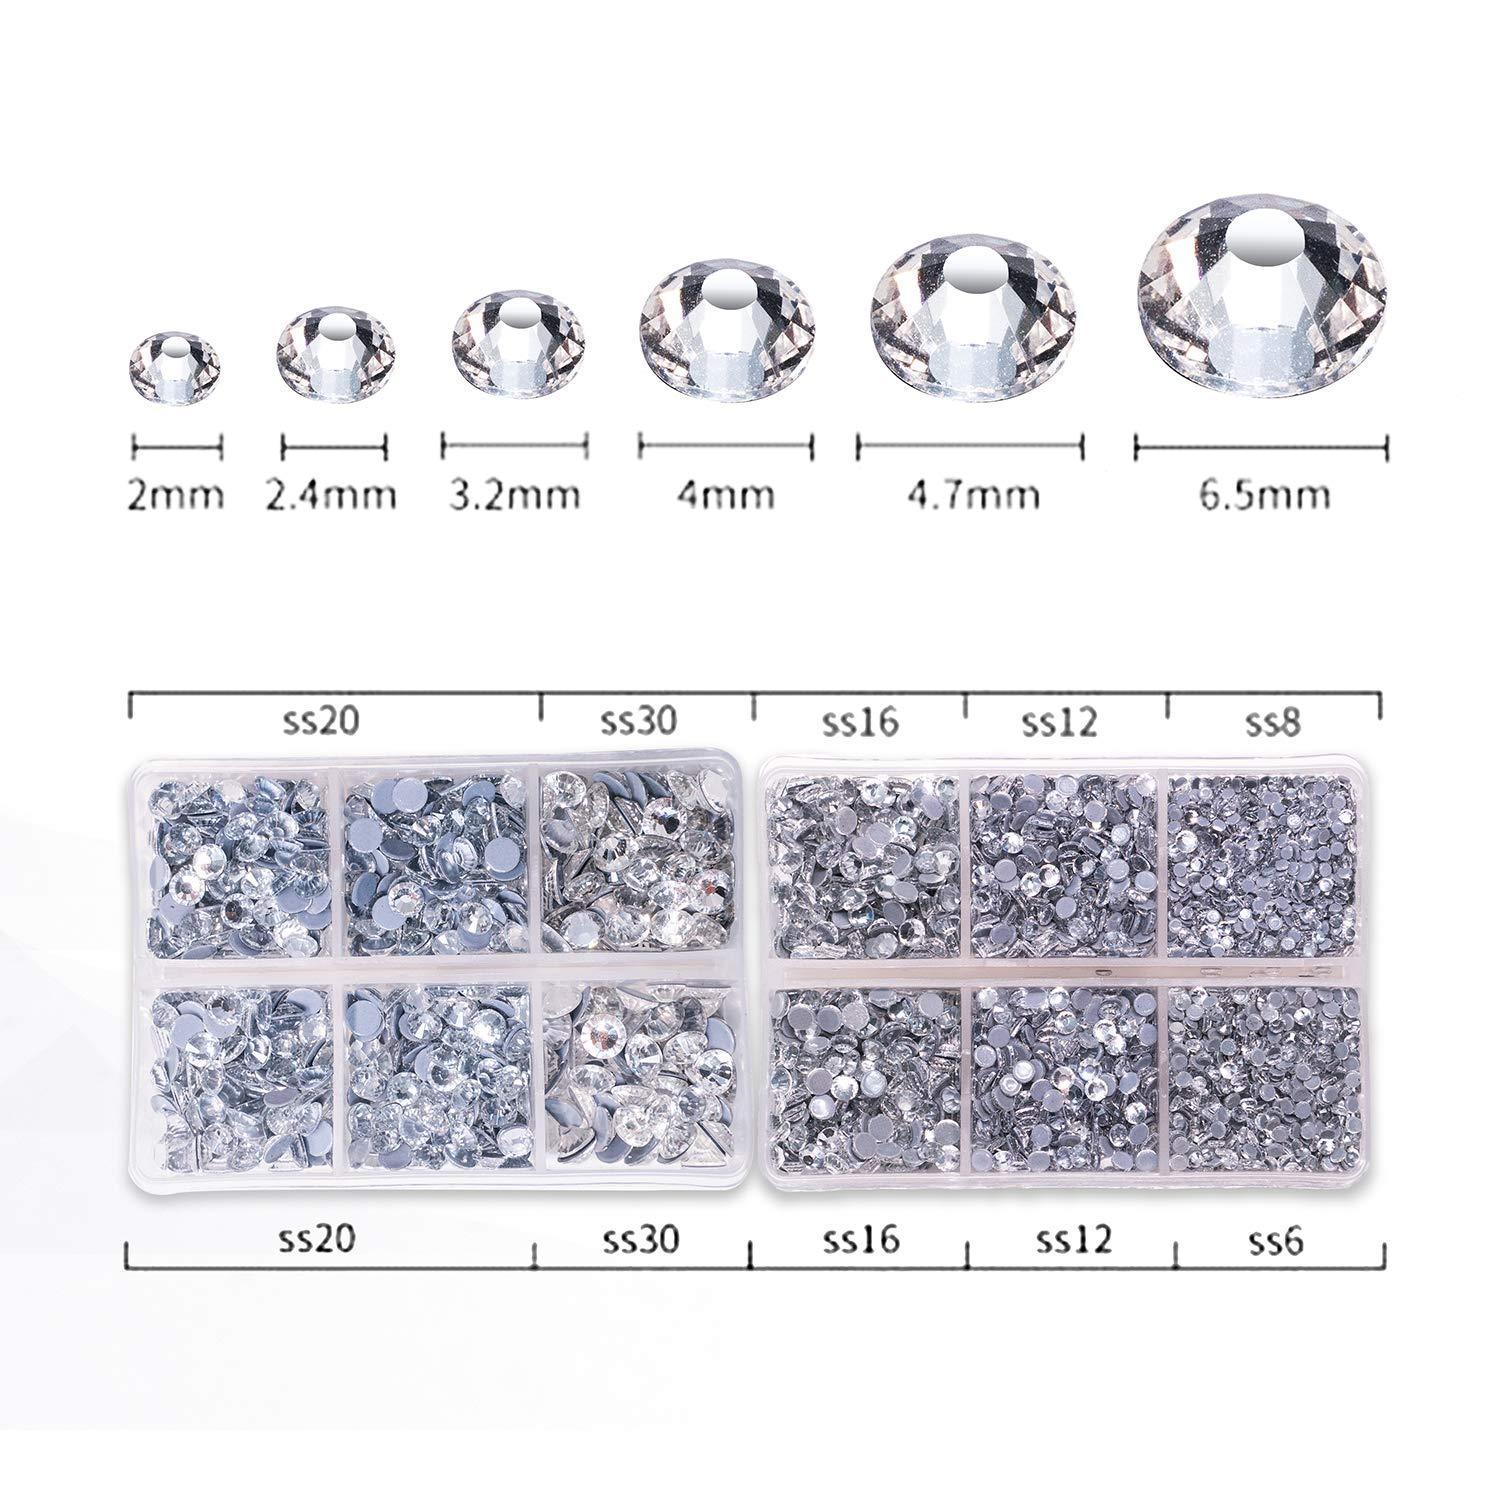 Clear Hotfix Rhinestones for Crafts, 6 Sizes Mixed Small & Large Flatback  Rhinestones for Clothes Fabric, Glass Hotfix Crystals Gems for Craft with